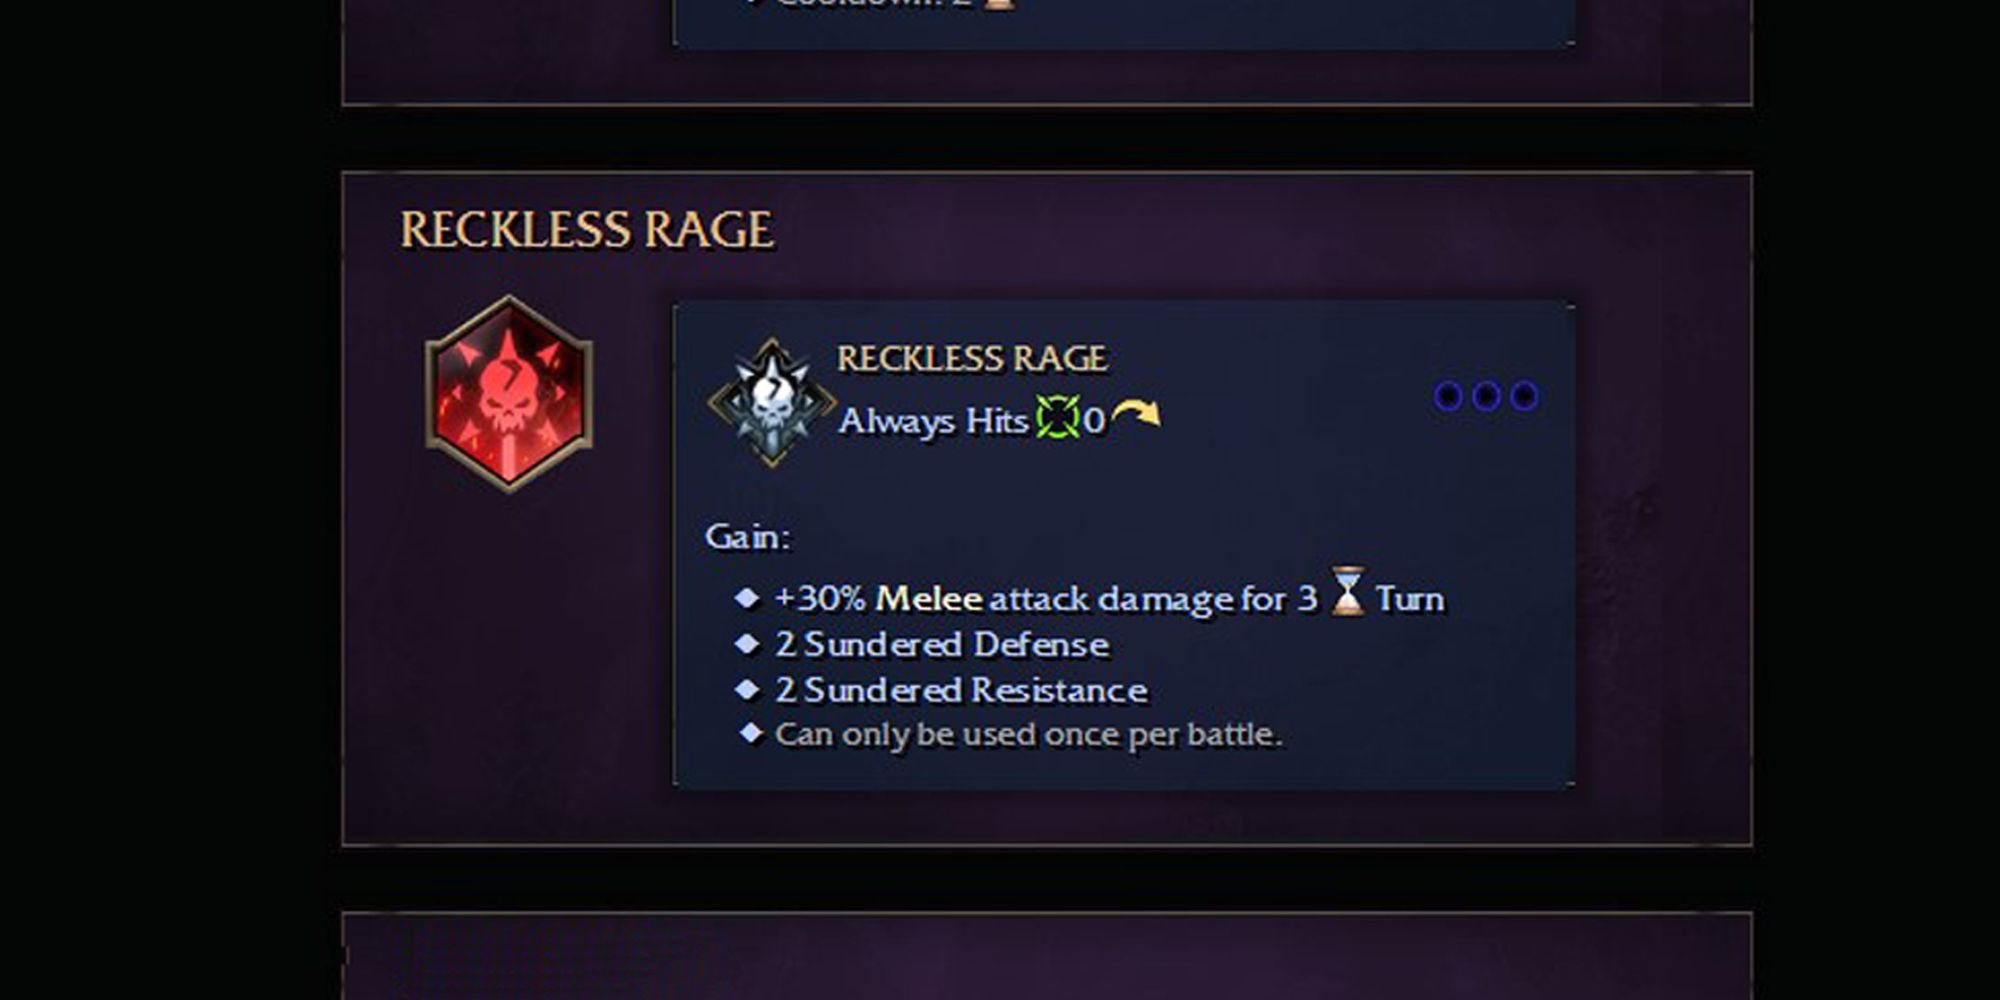 Age of Wonders 4: Reckless Rage skill stats